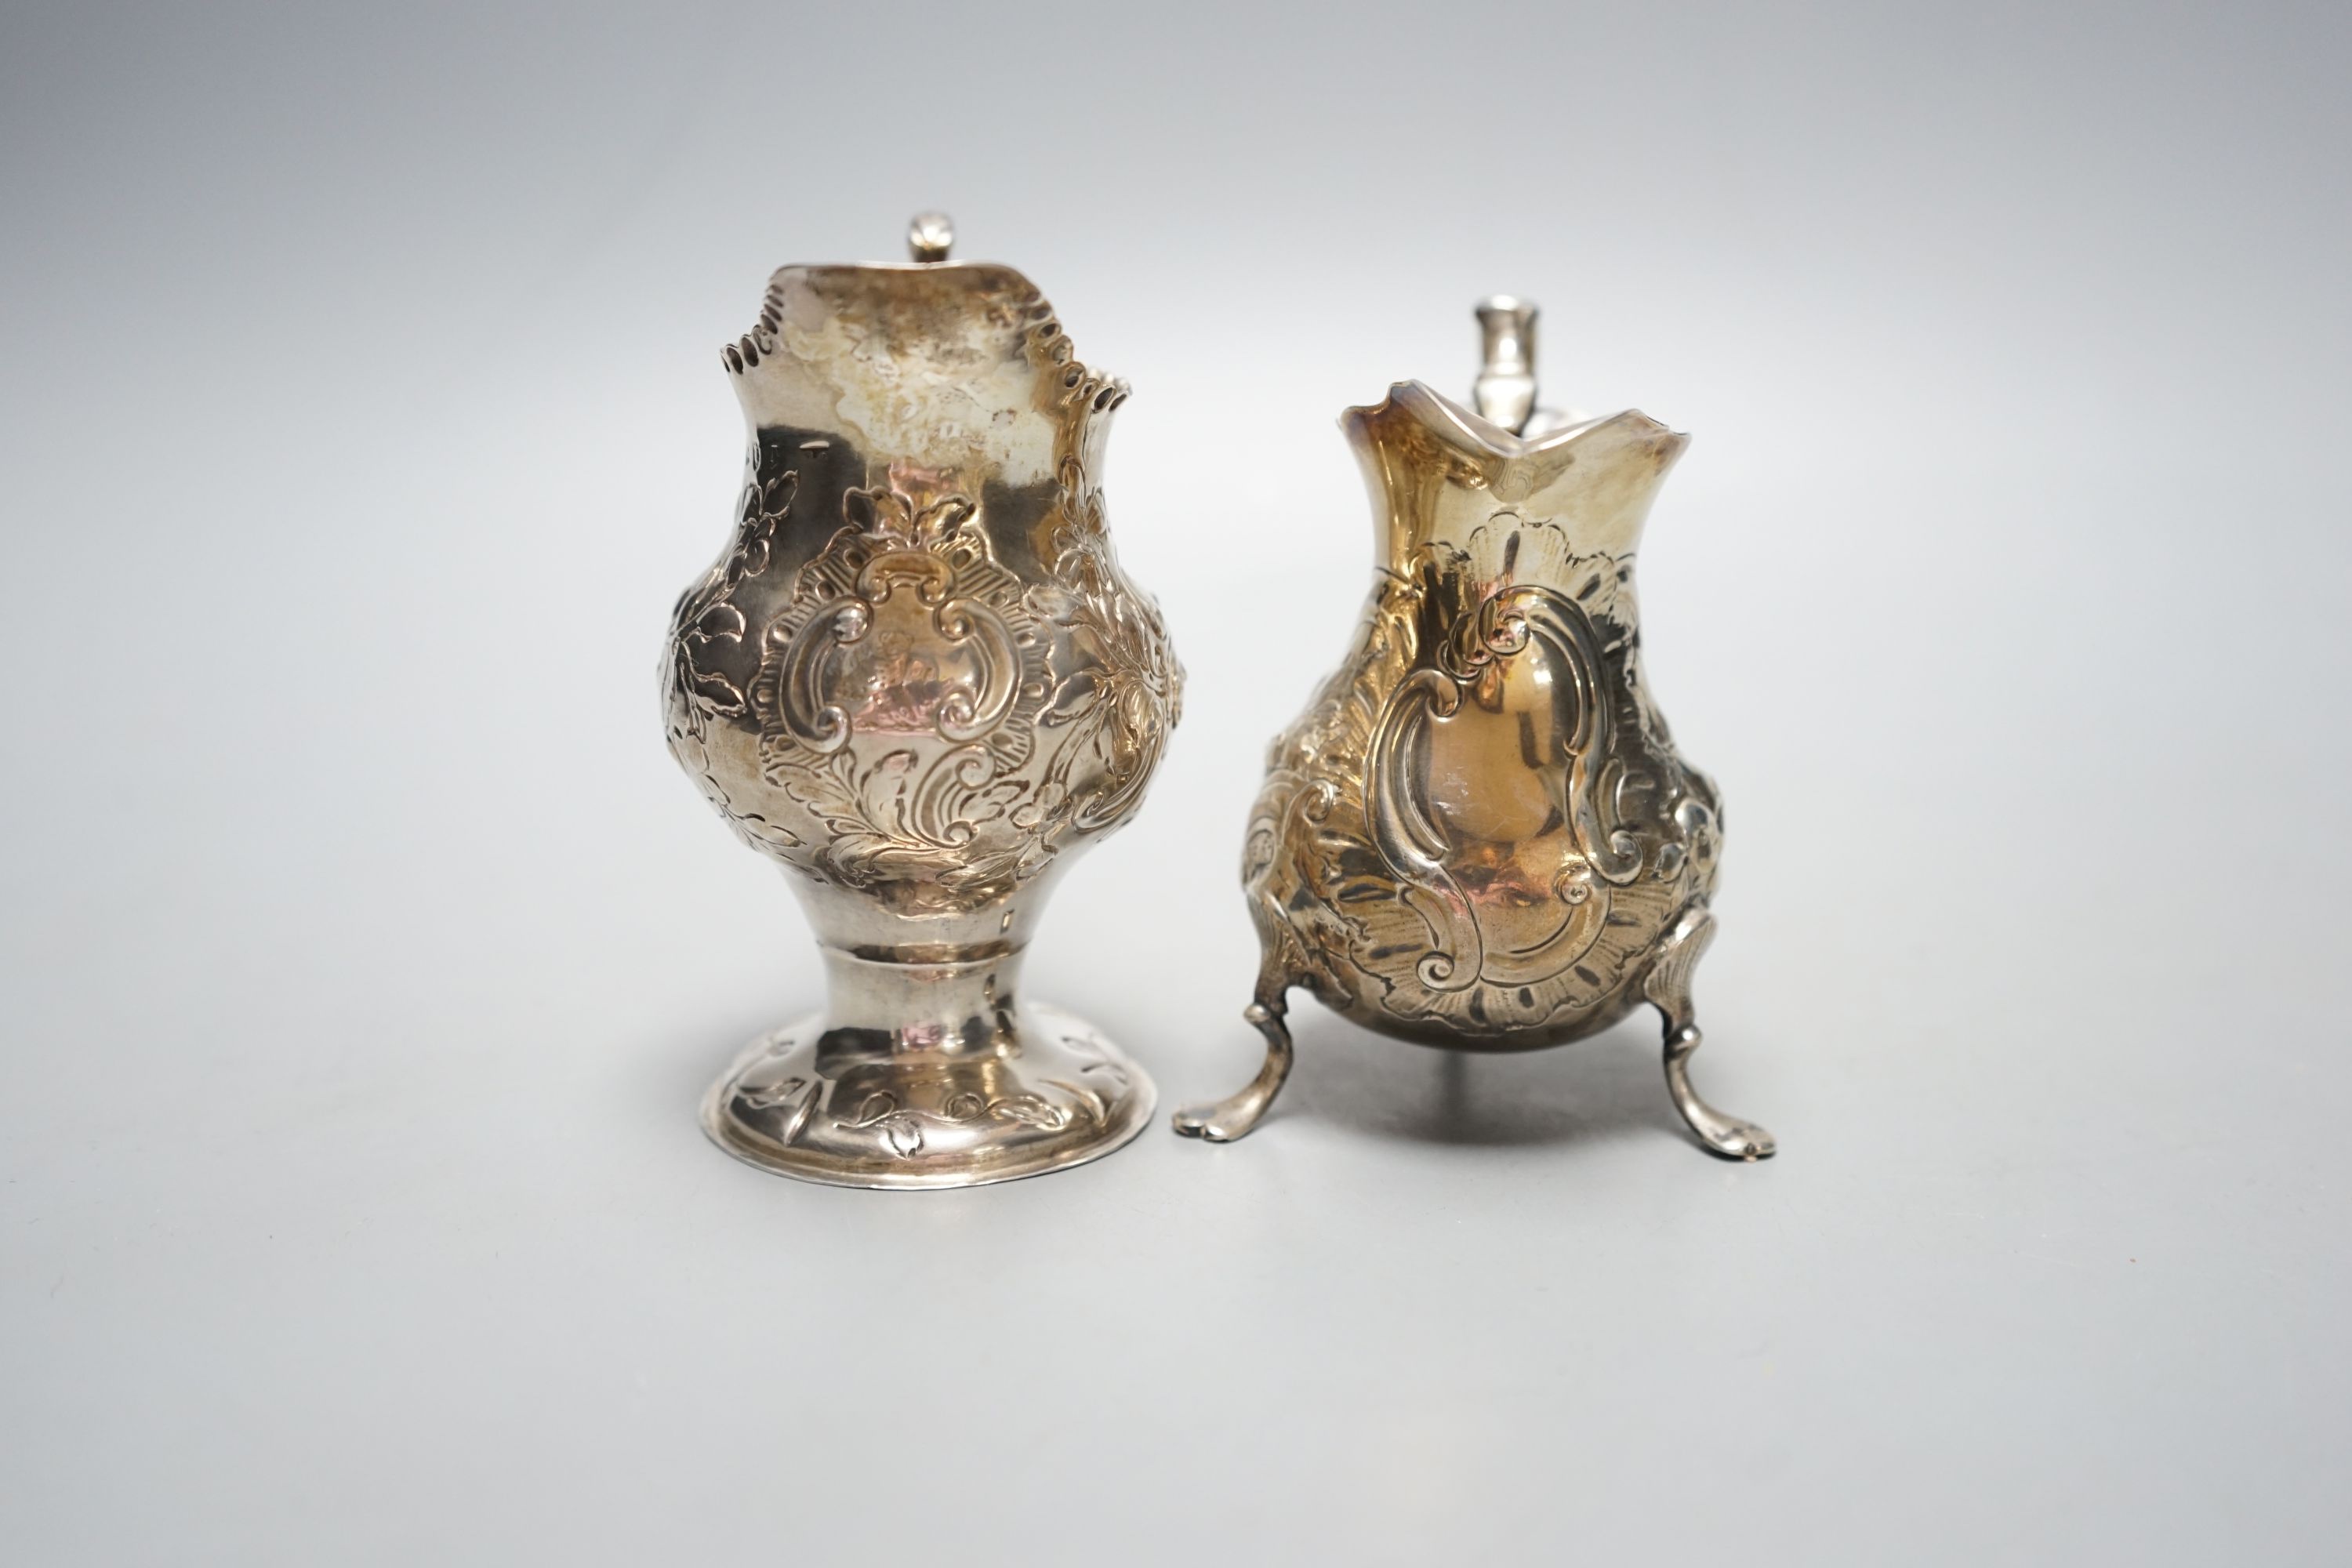 Two 18th century silver cream jugs, with later embossed decoration, London, 1753 & London, 1770, tallest 10.6cm, 174 grams.